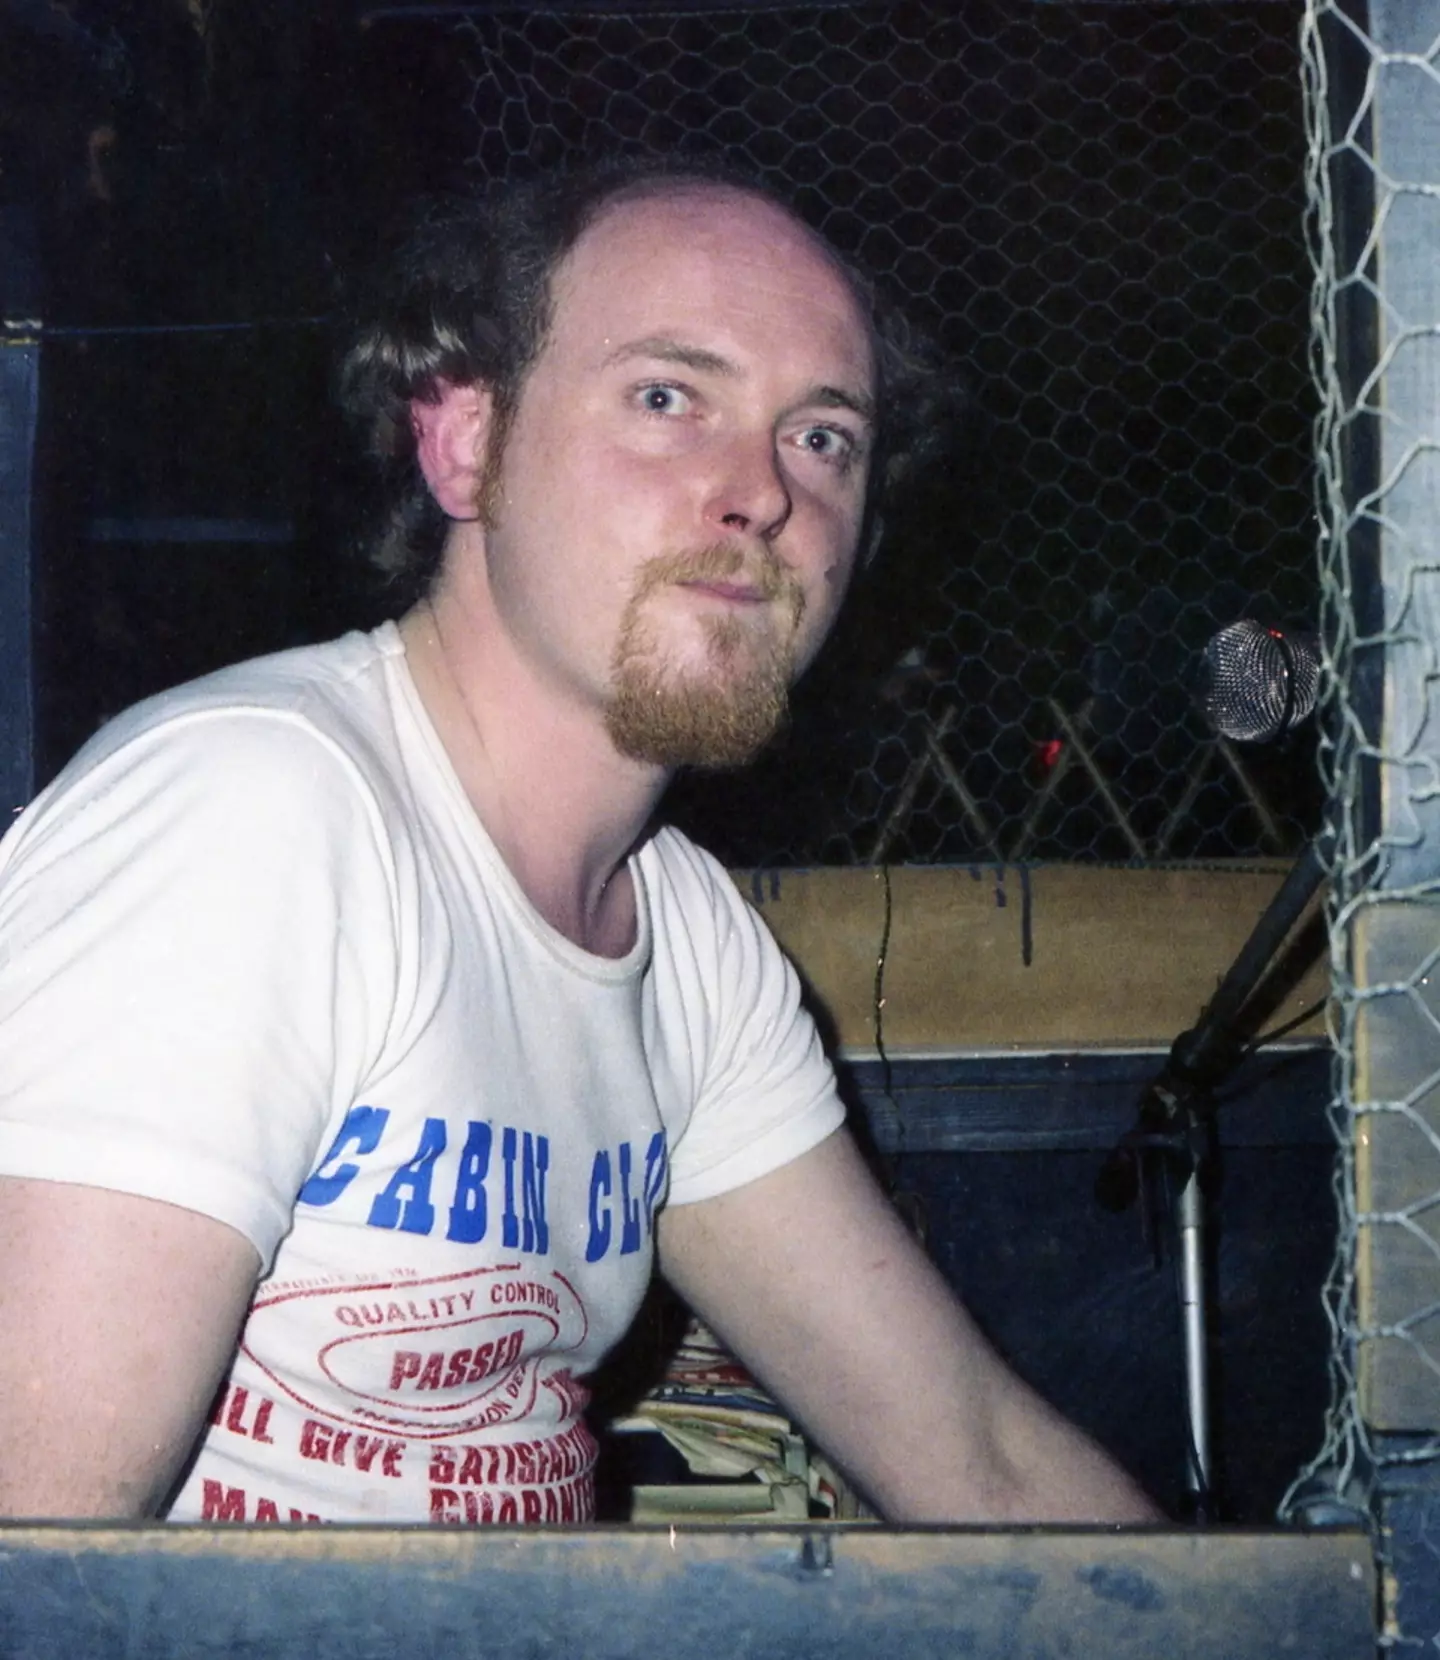 Robert worked as a DJ at Liverpool’s Cabin Club in the 1970s.